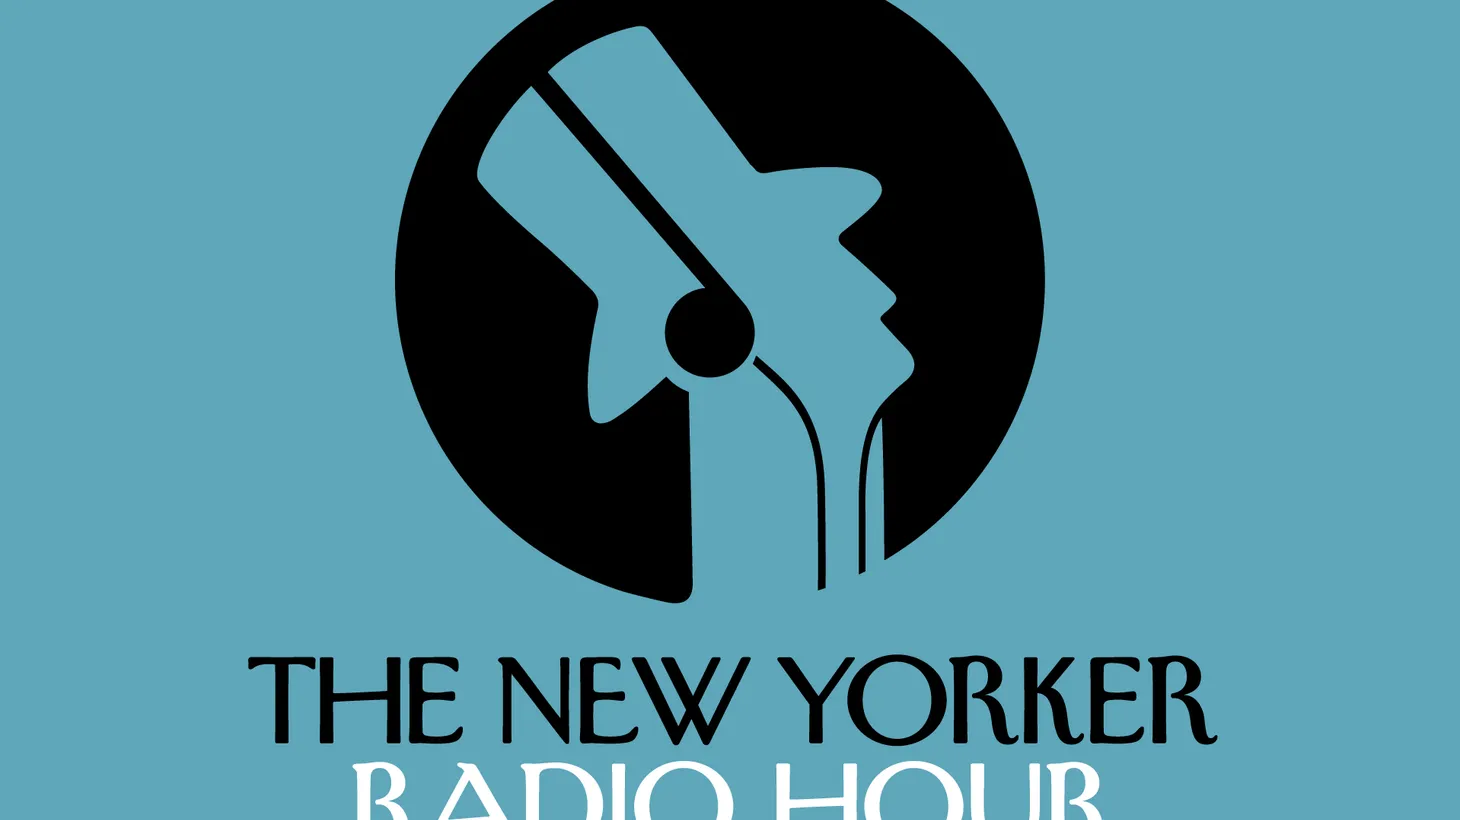 This week on the New Yorker Radio Hour, get a glimpse inside Donald Trump’s exclusive club Mar-a-Lago.